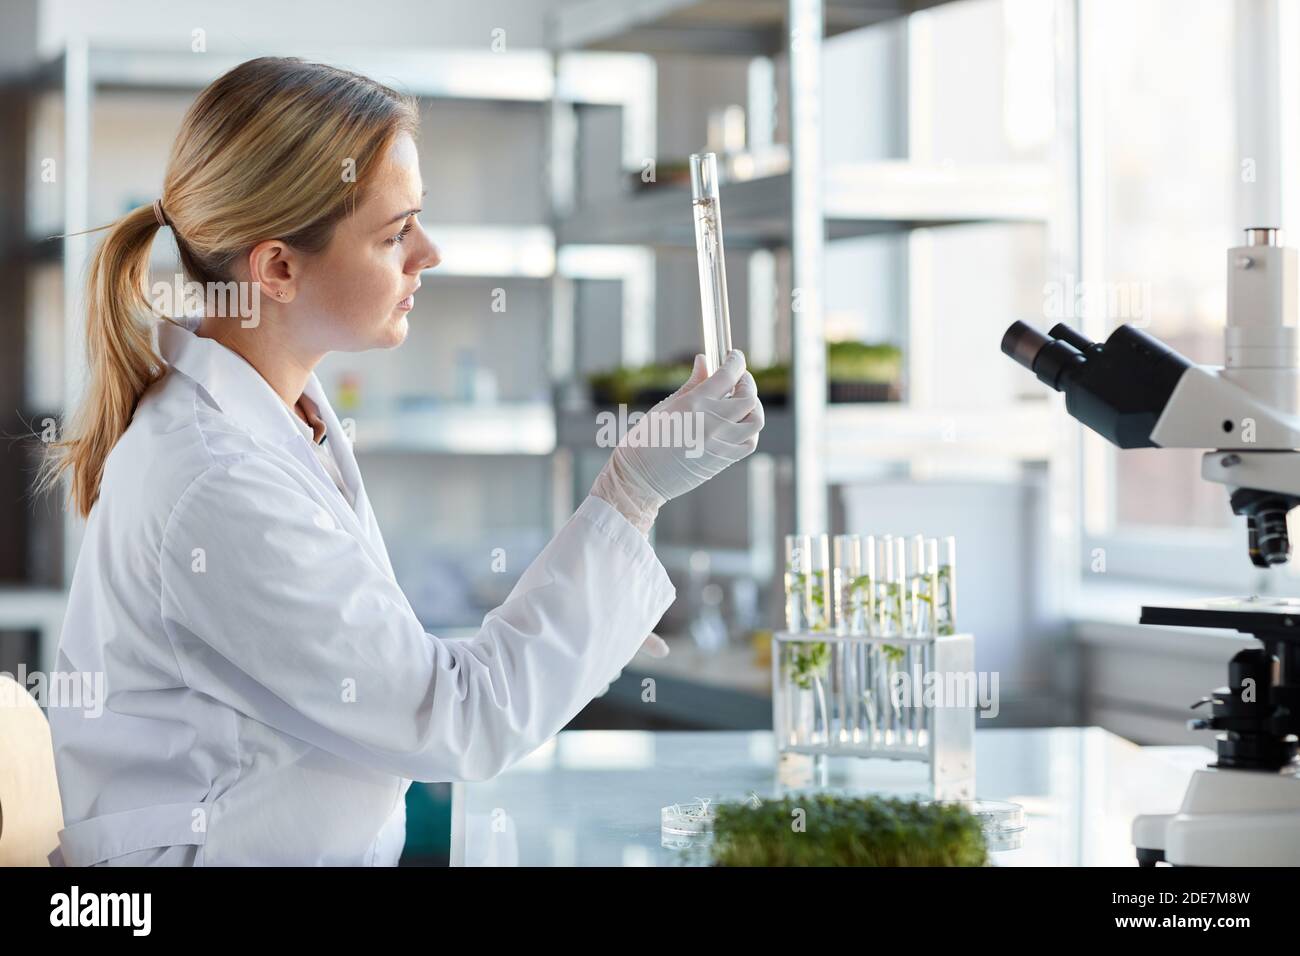 Side view portrait of young female scientist holding test tube with plant samples while working on research in biotechnology lab, copy space Stock Photo